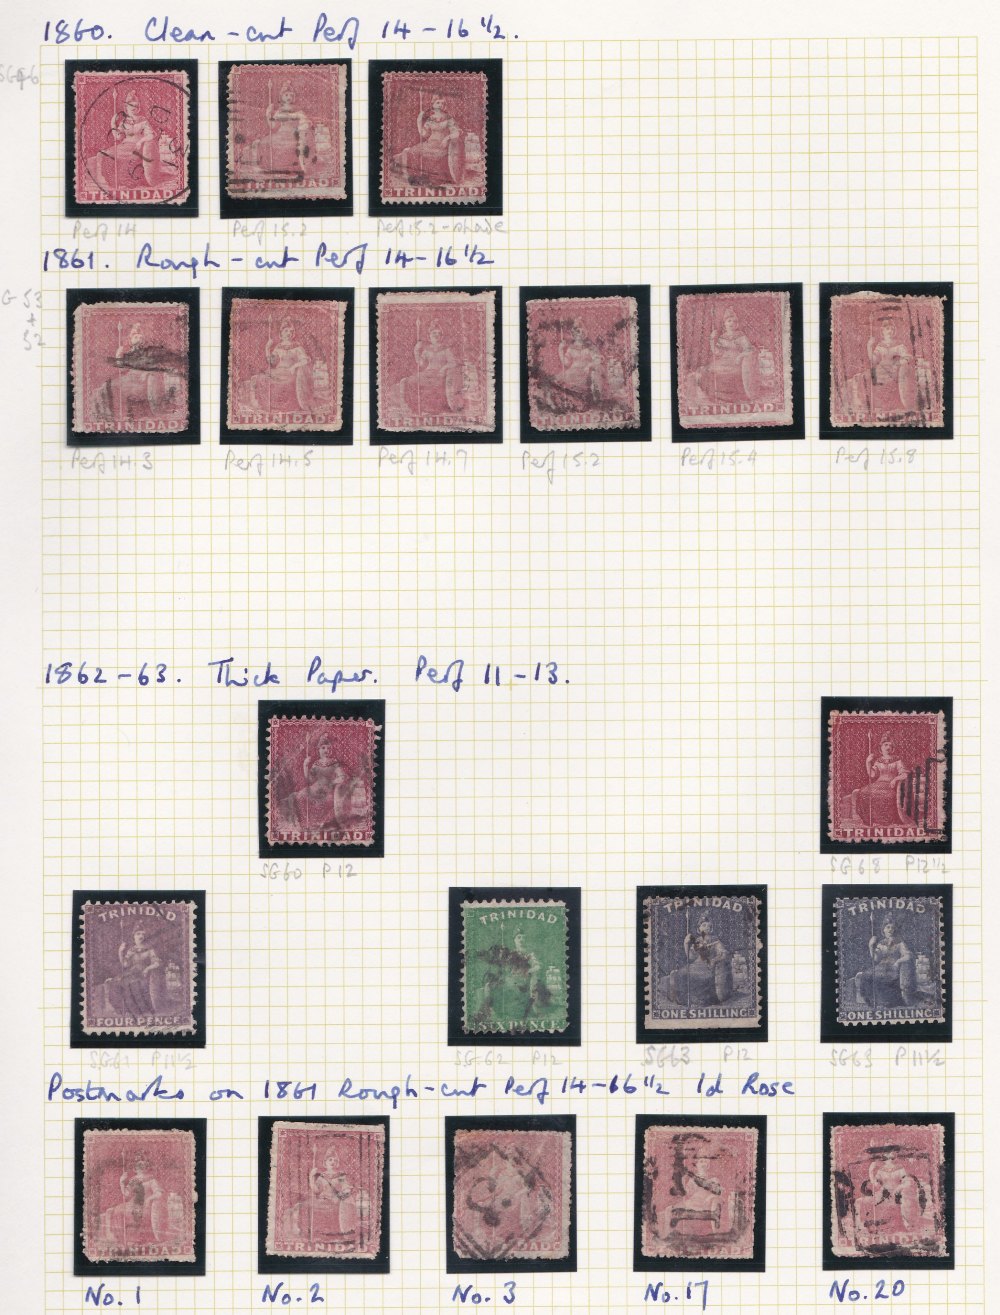 STAMPS: Commonwealth collection of Caribbean countries. St Vincent, St Lucia, Trinidad war tax